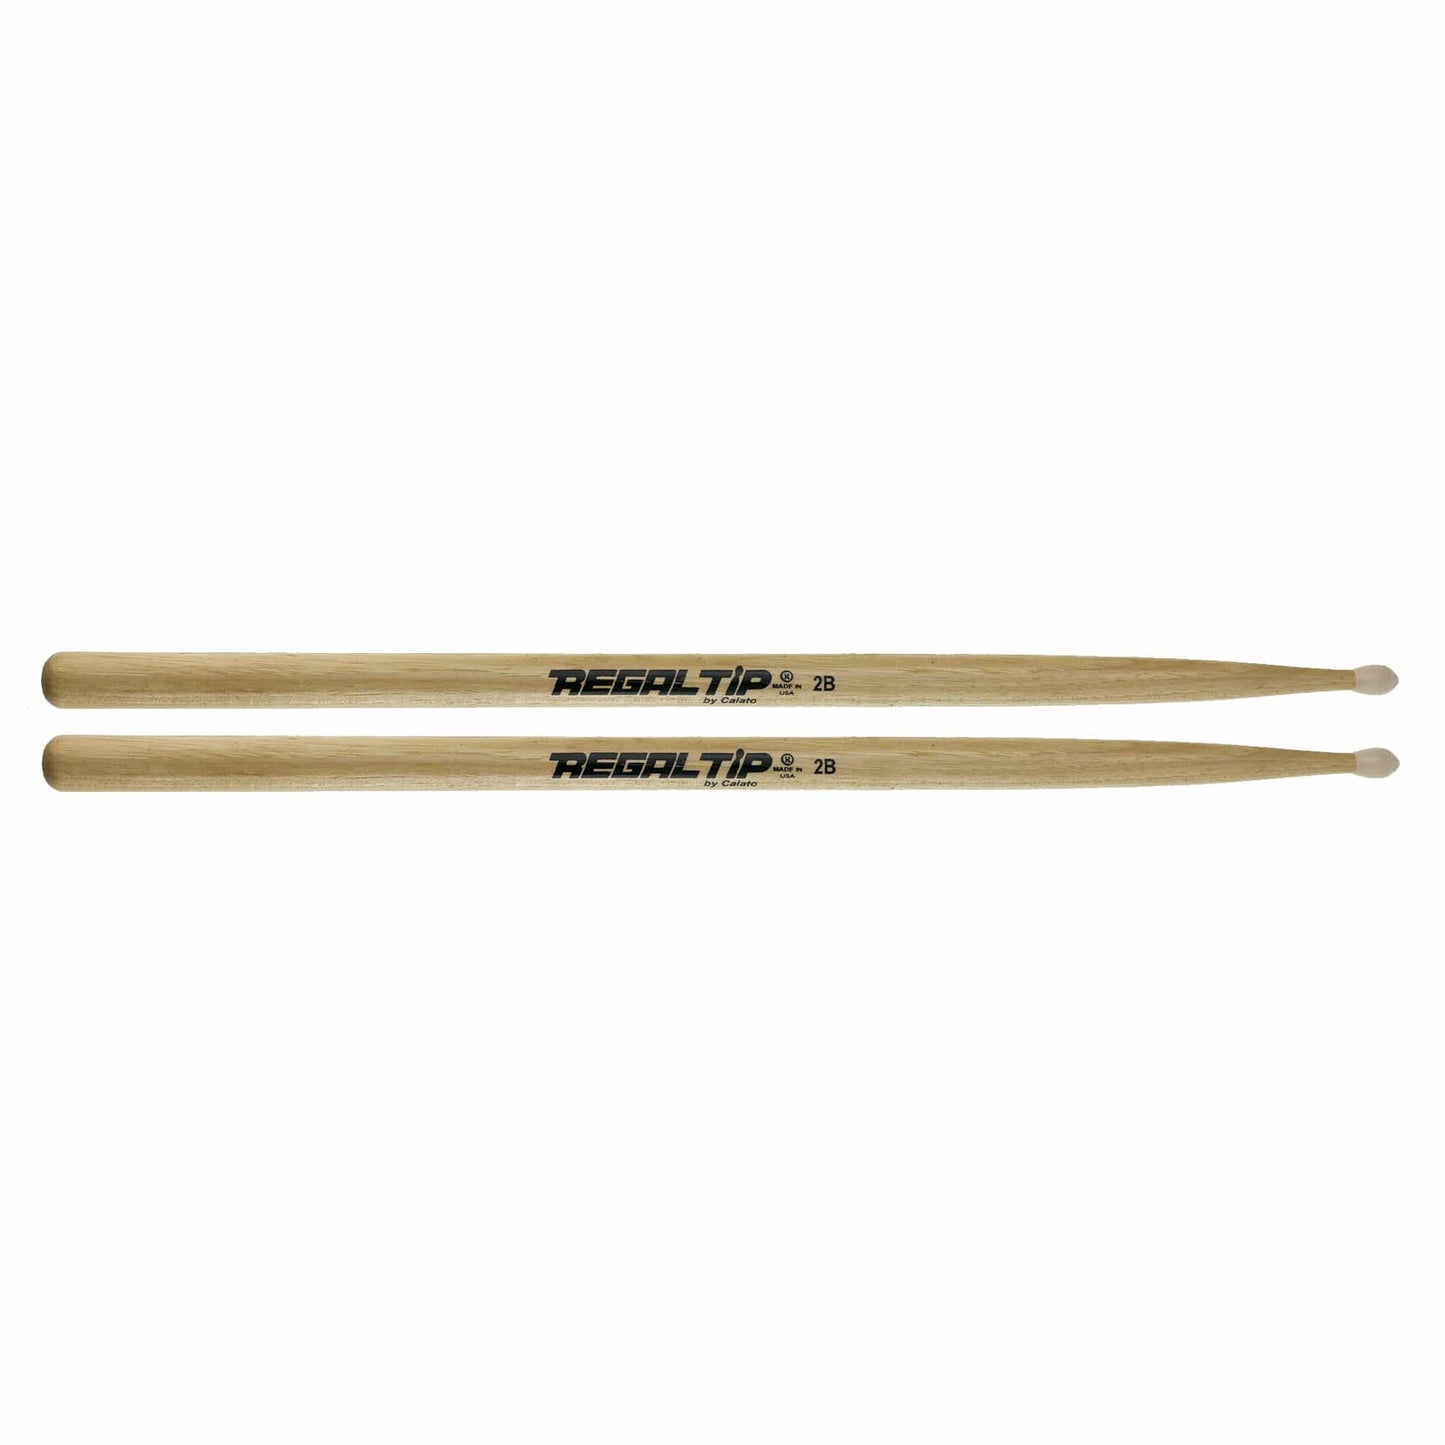 Regal Tip 2B Hickory Nylon Tip Drum Sticks Drums and Percussion / Parts and Accessories / Drum Sticks and Mallets